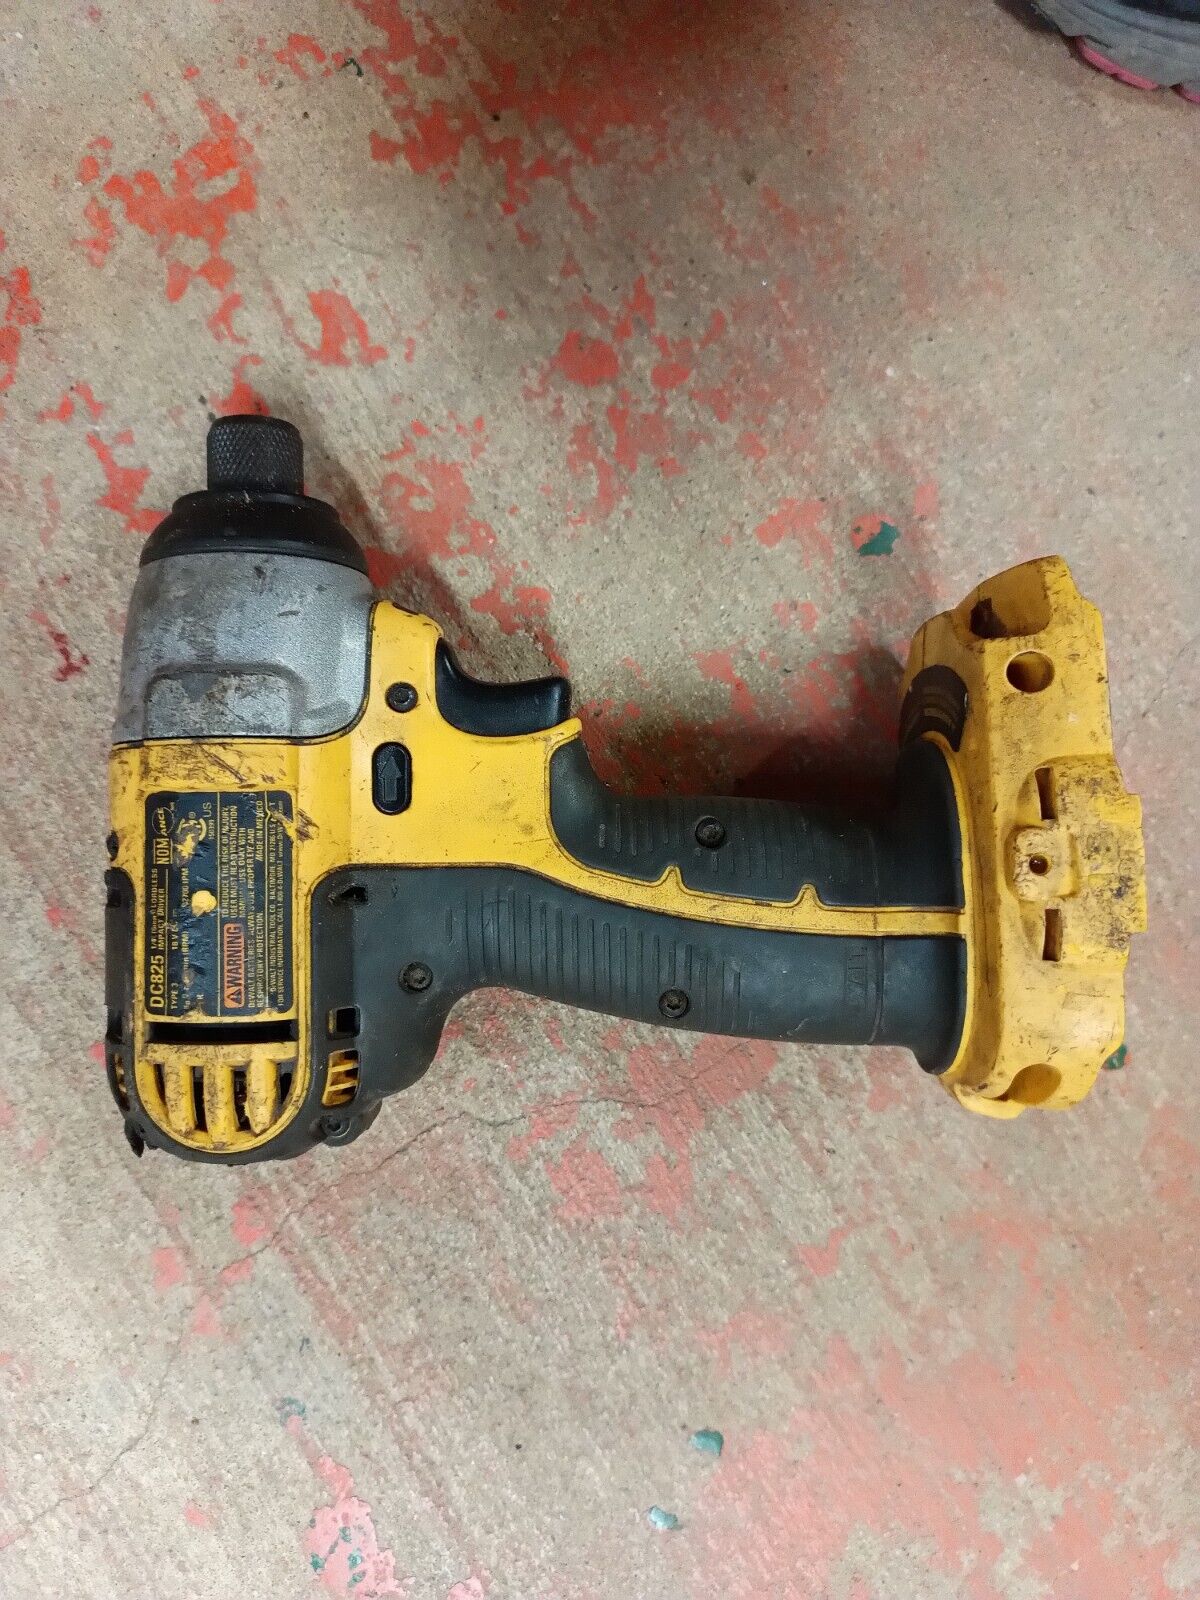 Dewalt Dc825 1/4 Inch Cordless Impact Driver Works Needs Battery & Charger